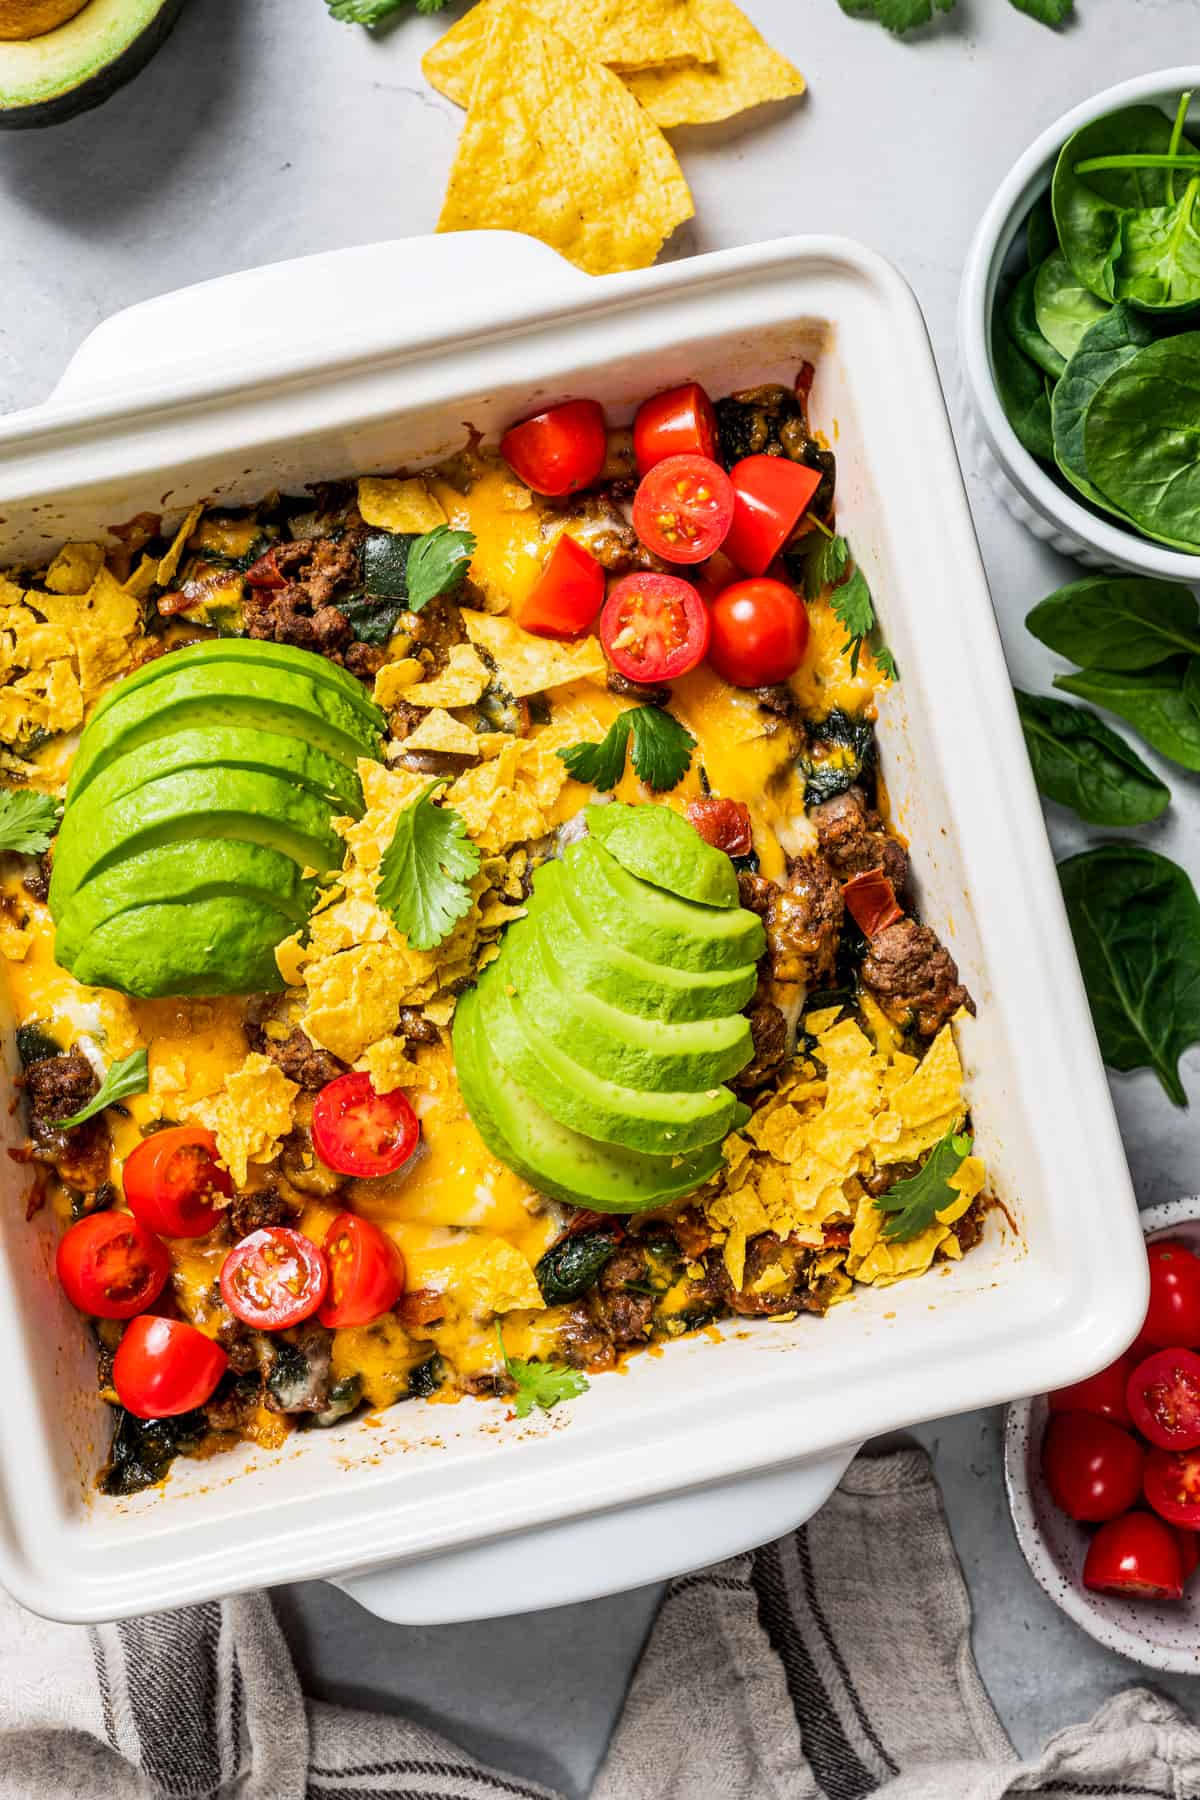 Overhead view of a baked taco casserole in a square baking dish topped with sliced avocados, cherry tomatoes, and fresh cilantro.